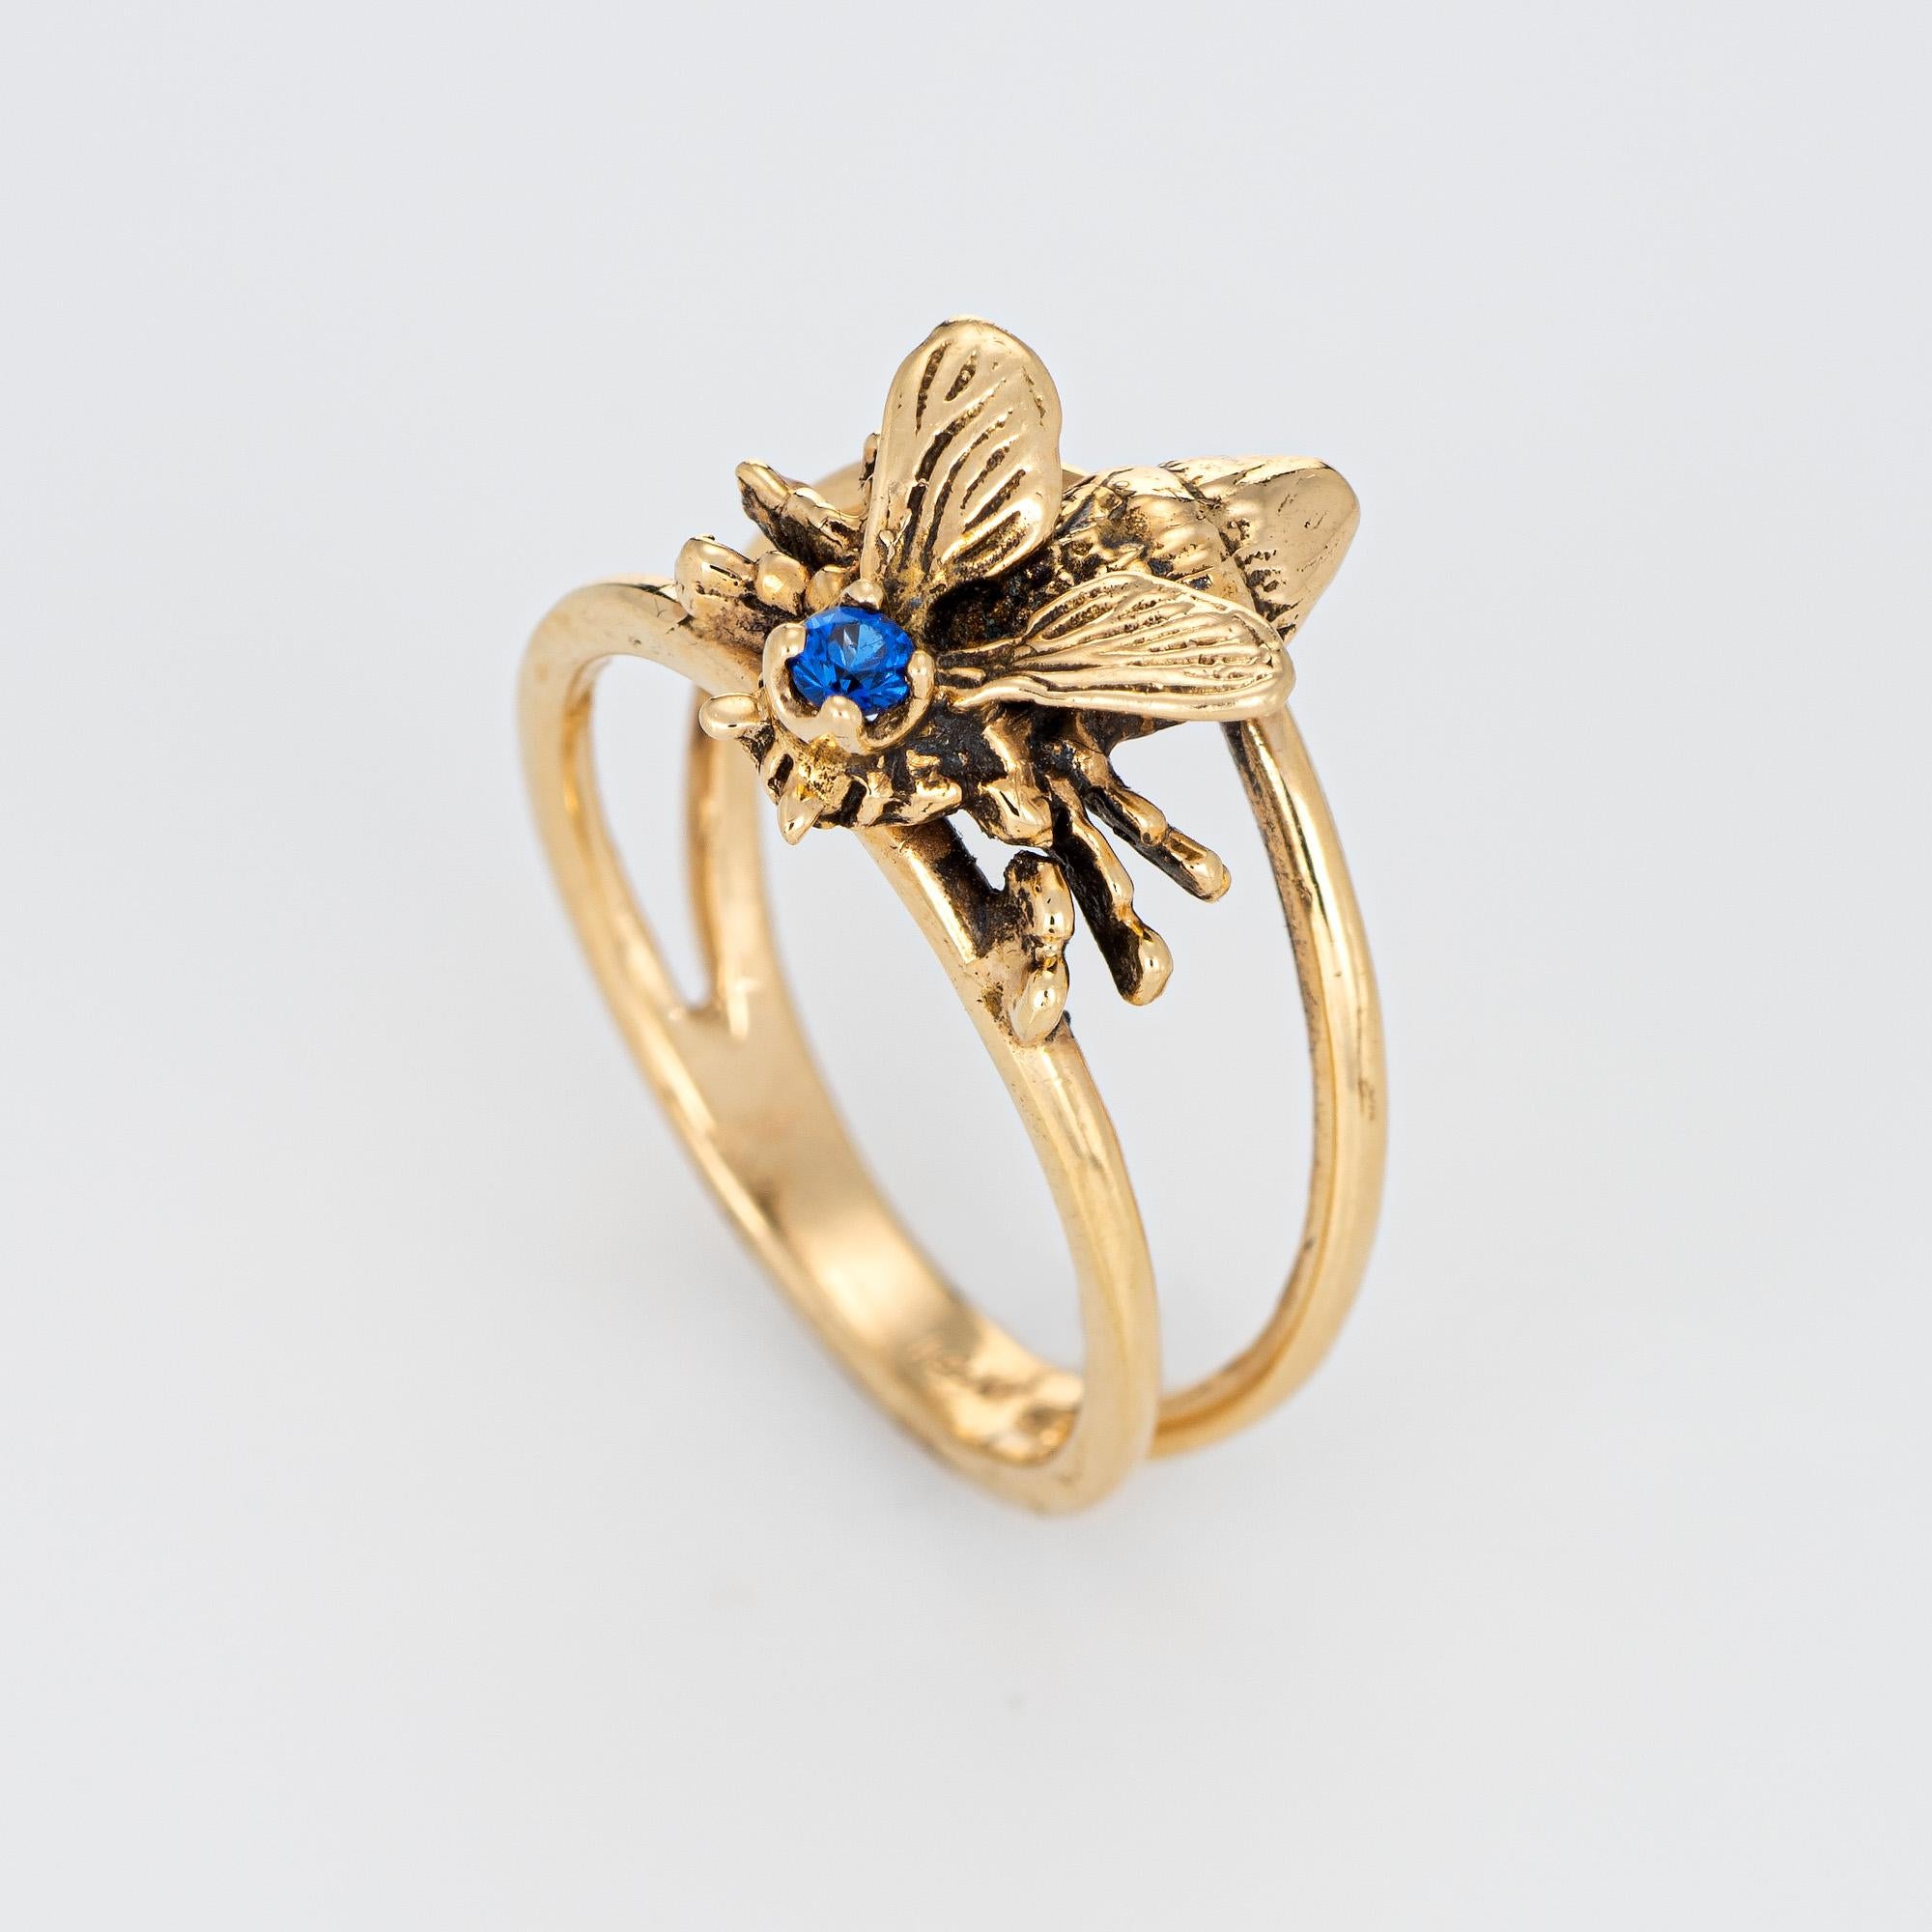 Stylish vintage bumble bee crafted in 14 karat yellow gold. 

One estimated 0.05 carat sapphire is set into the mount. The sapphire is in excellent condition and free of cracks or chips. 

The nicely detailed bee features lifelike detail to the